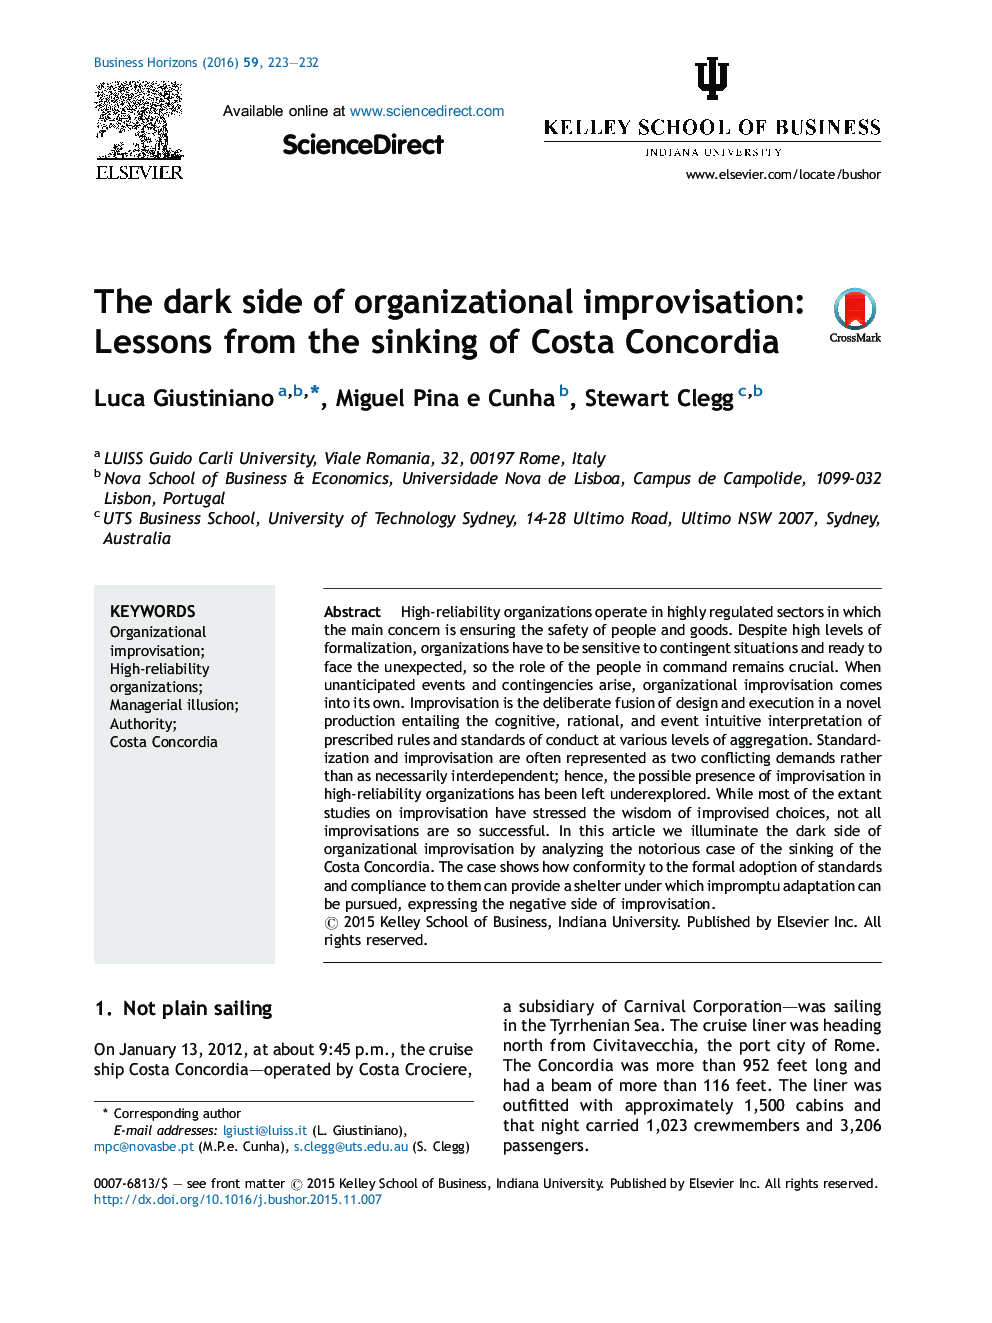 The dark side of organizational improvisation: Lessons from the sinking of Costa Concordia